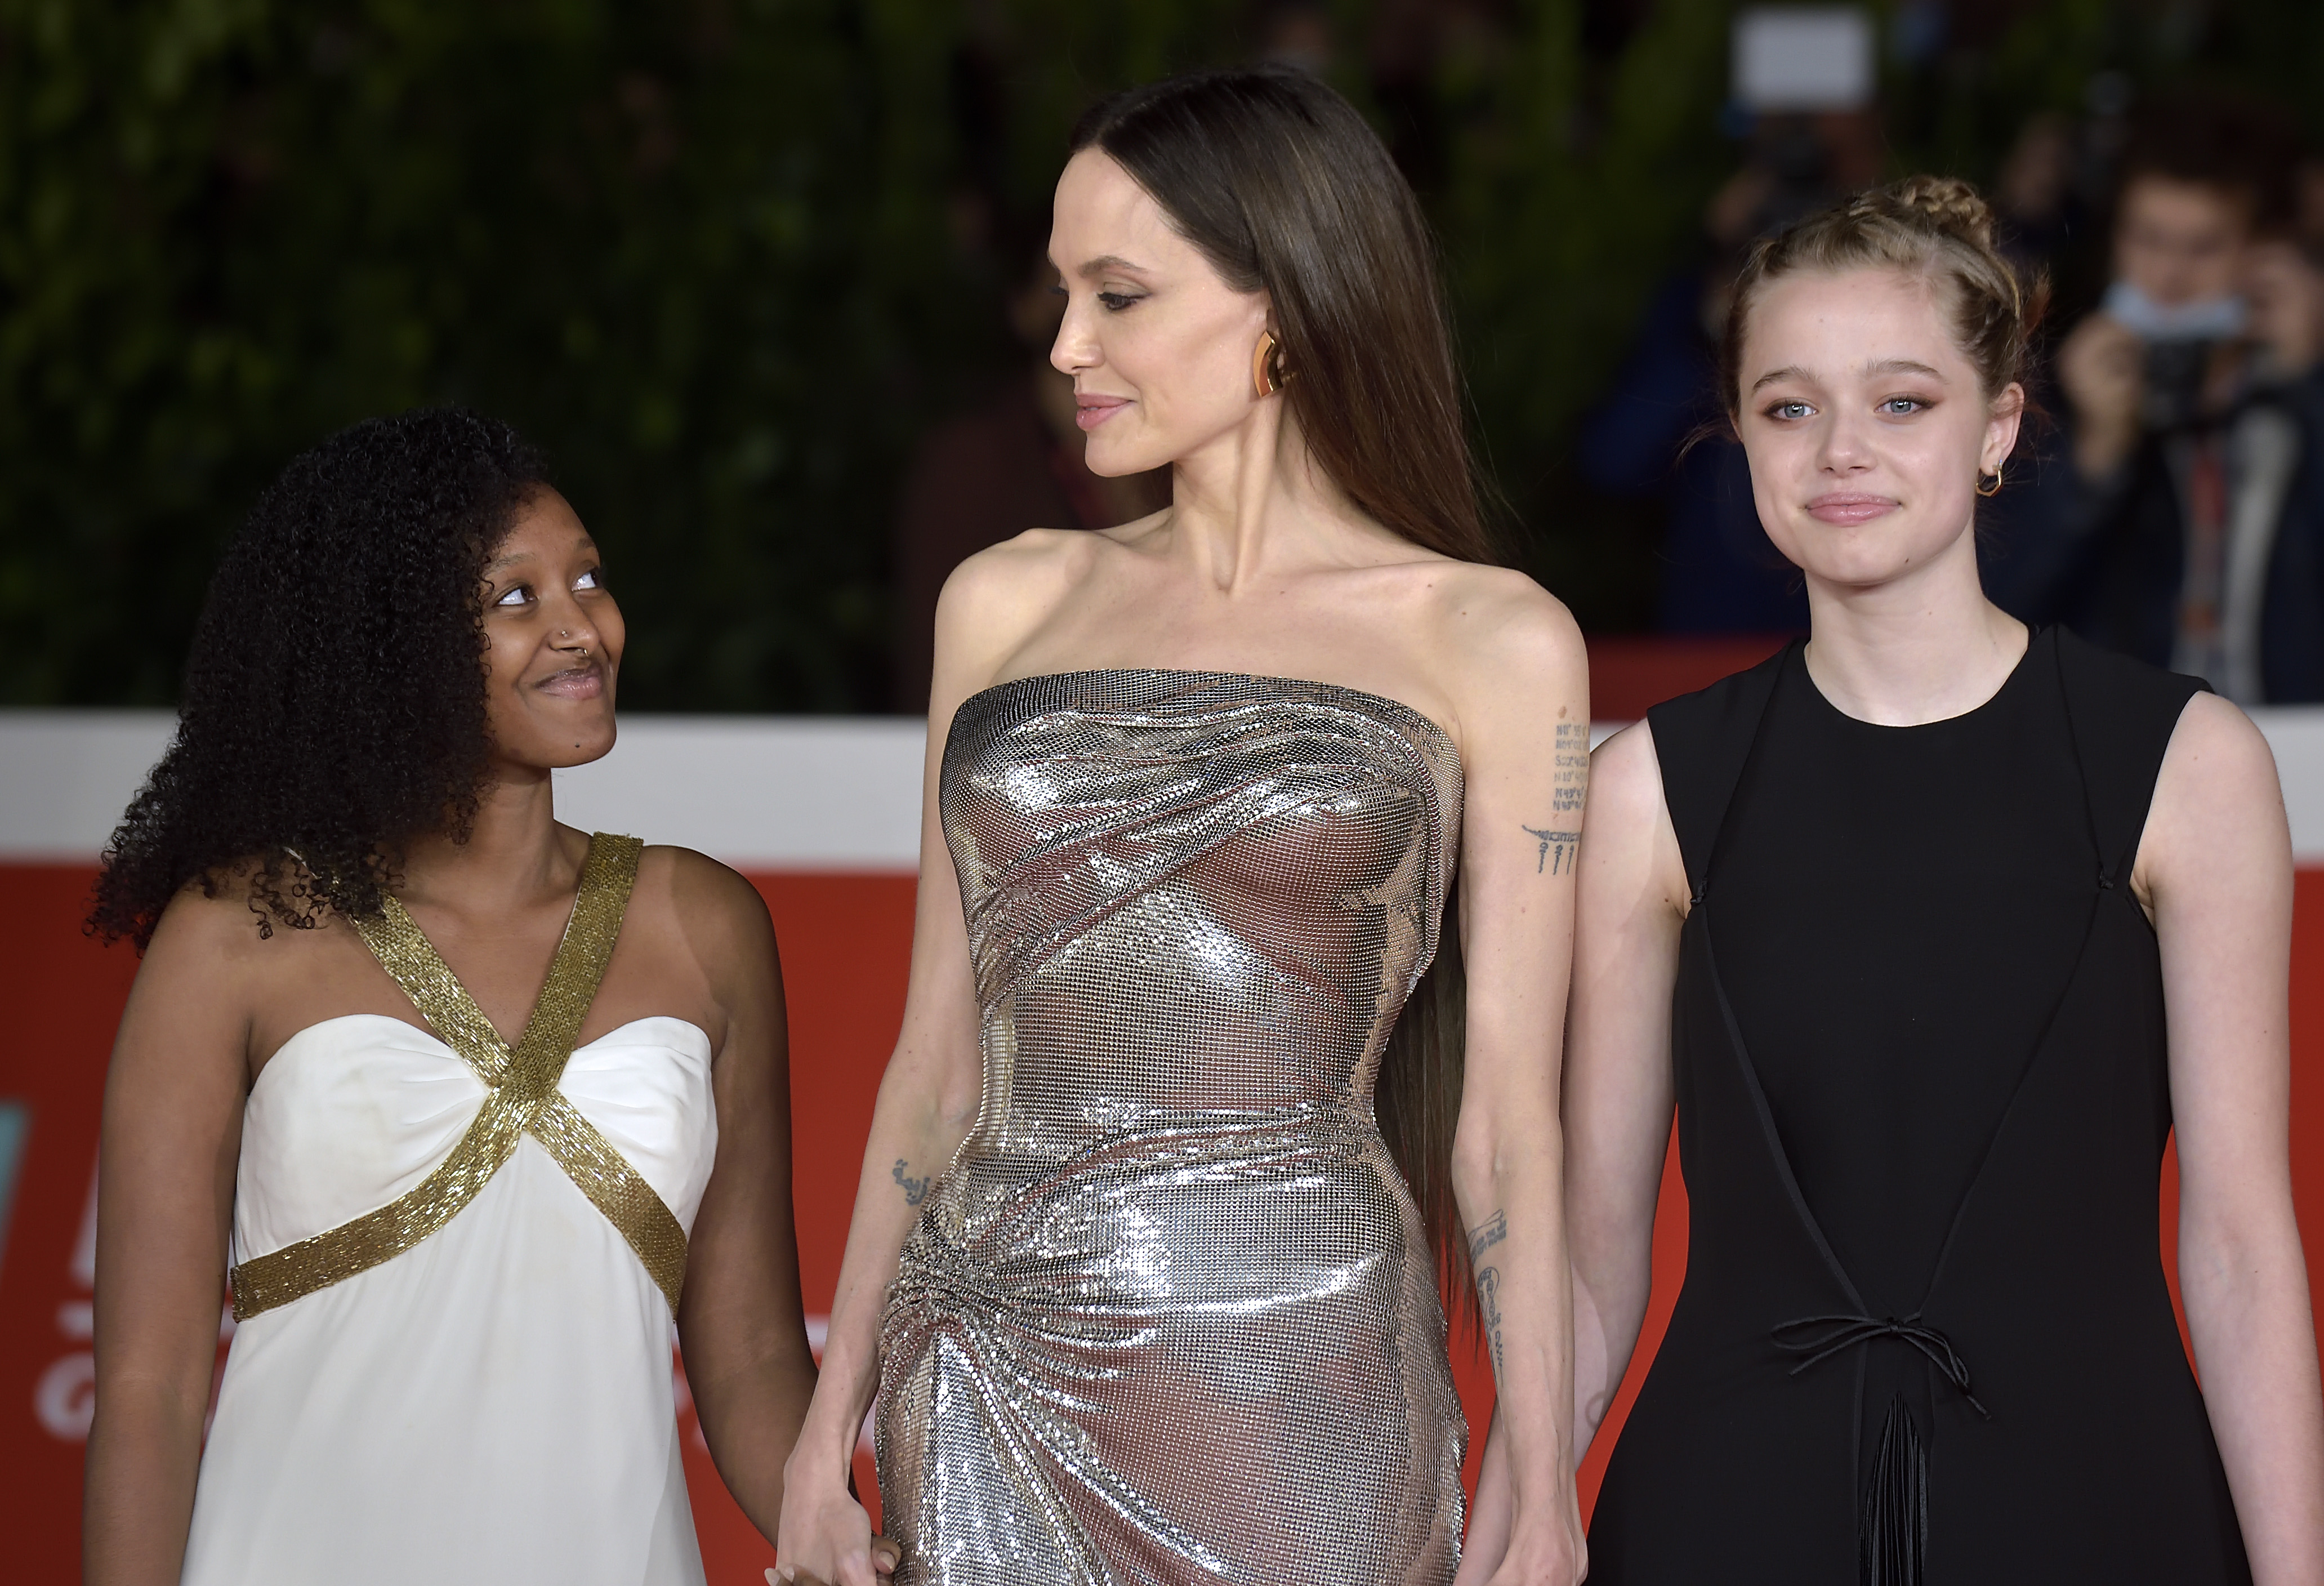 Zahara Marley Jolie-Pitt, Angelina Jolie, and Shiloh Jolie-Pitt at Rome Film Fest in Rome, Italy on October 24, 2021 | Source: Getty Images